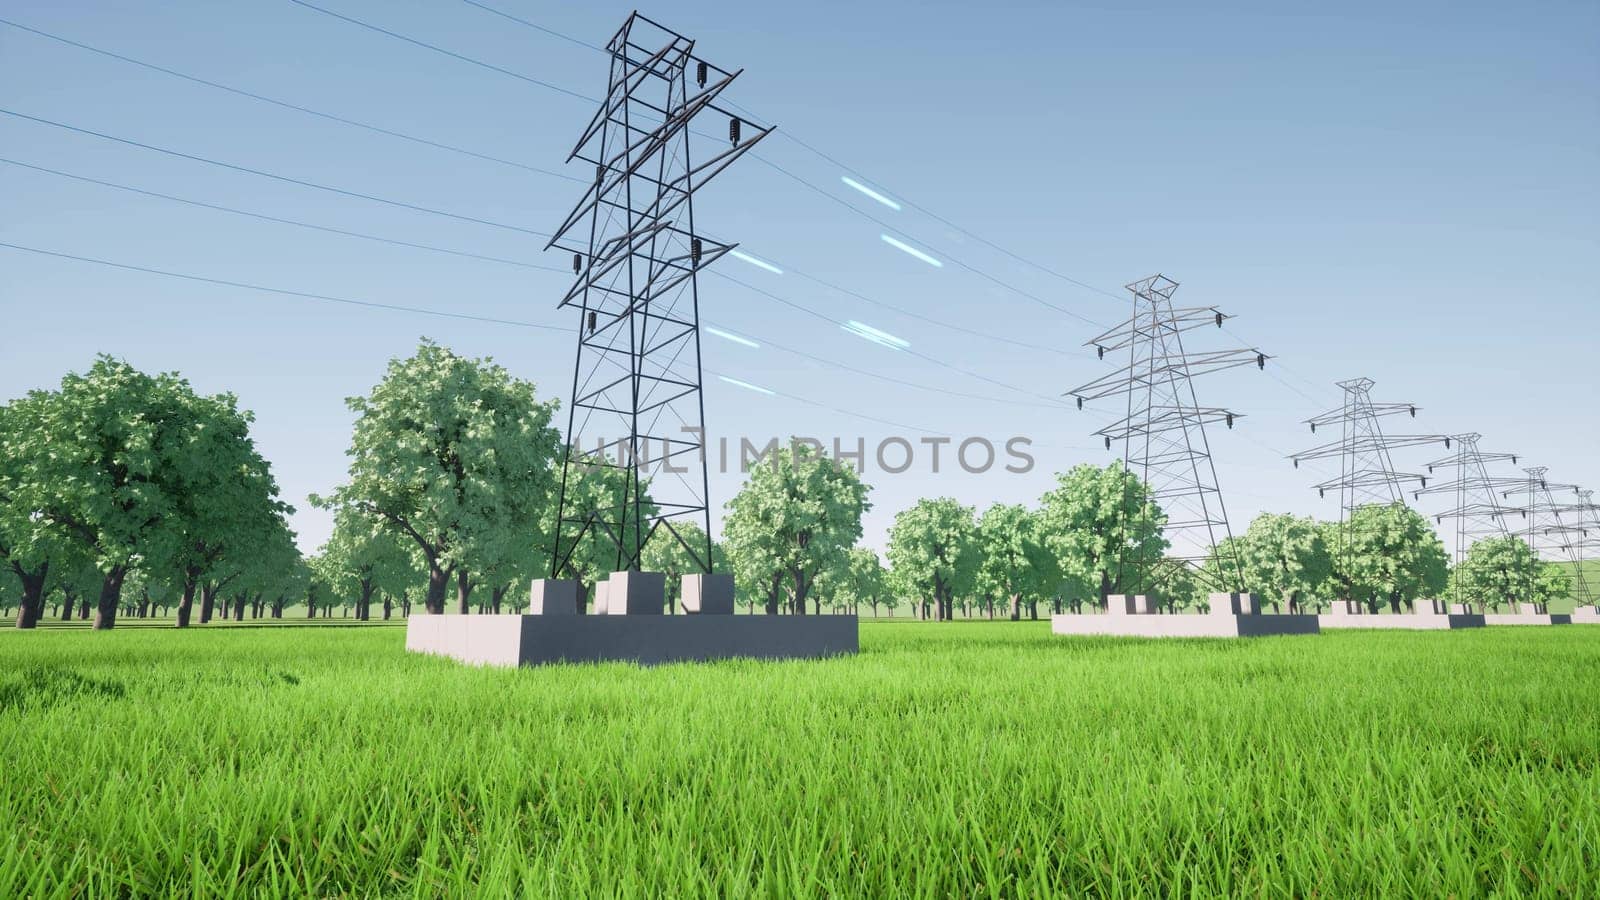 Electrical impulse moves through wires Power transmission towers 3d render by Zozulinskyi